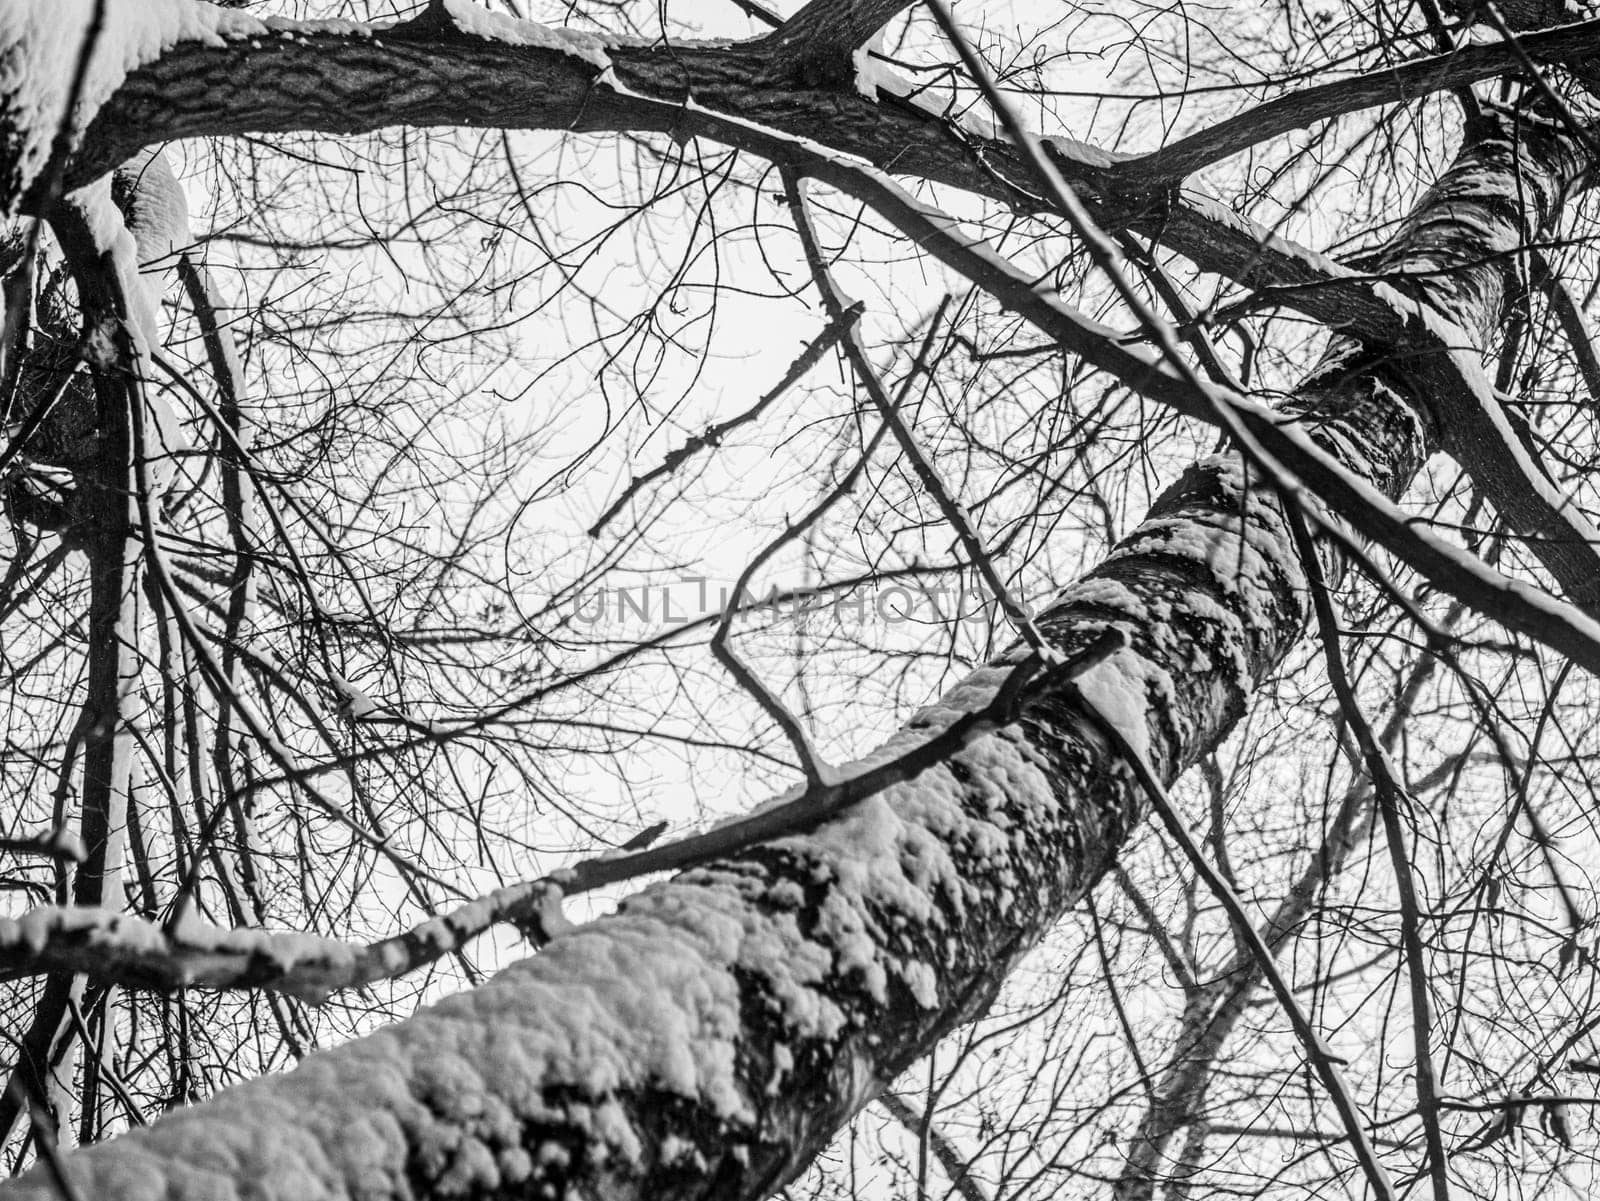 Tree branches covered with frozen snow on a cold winter day. Black and white shades of gray.